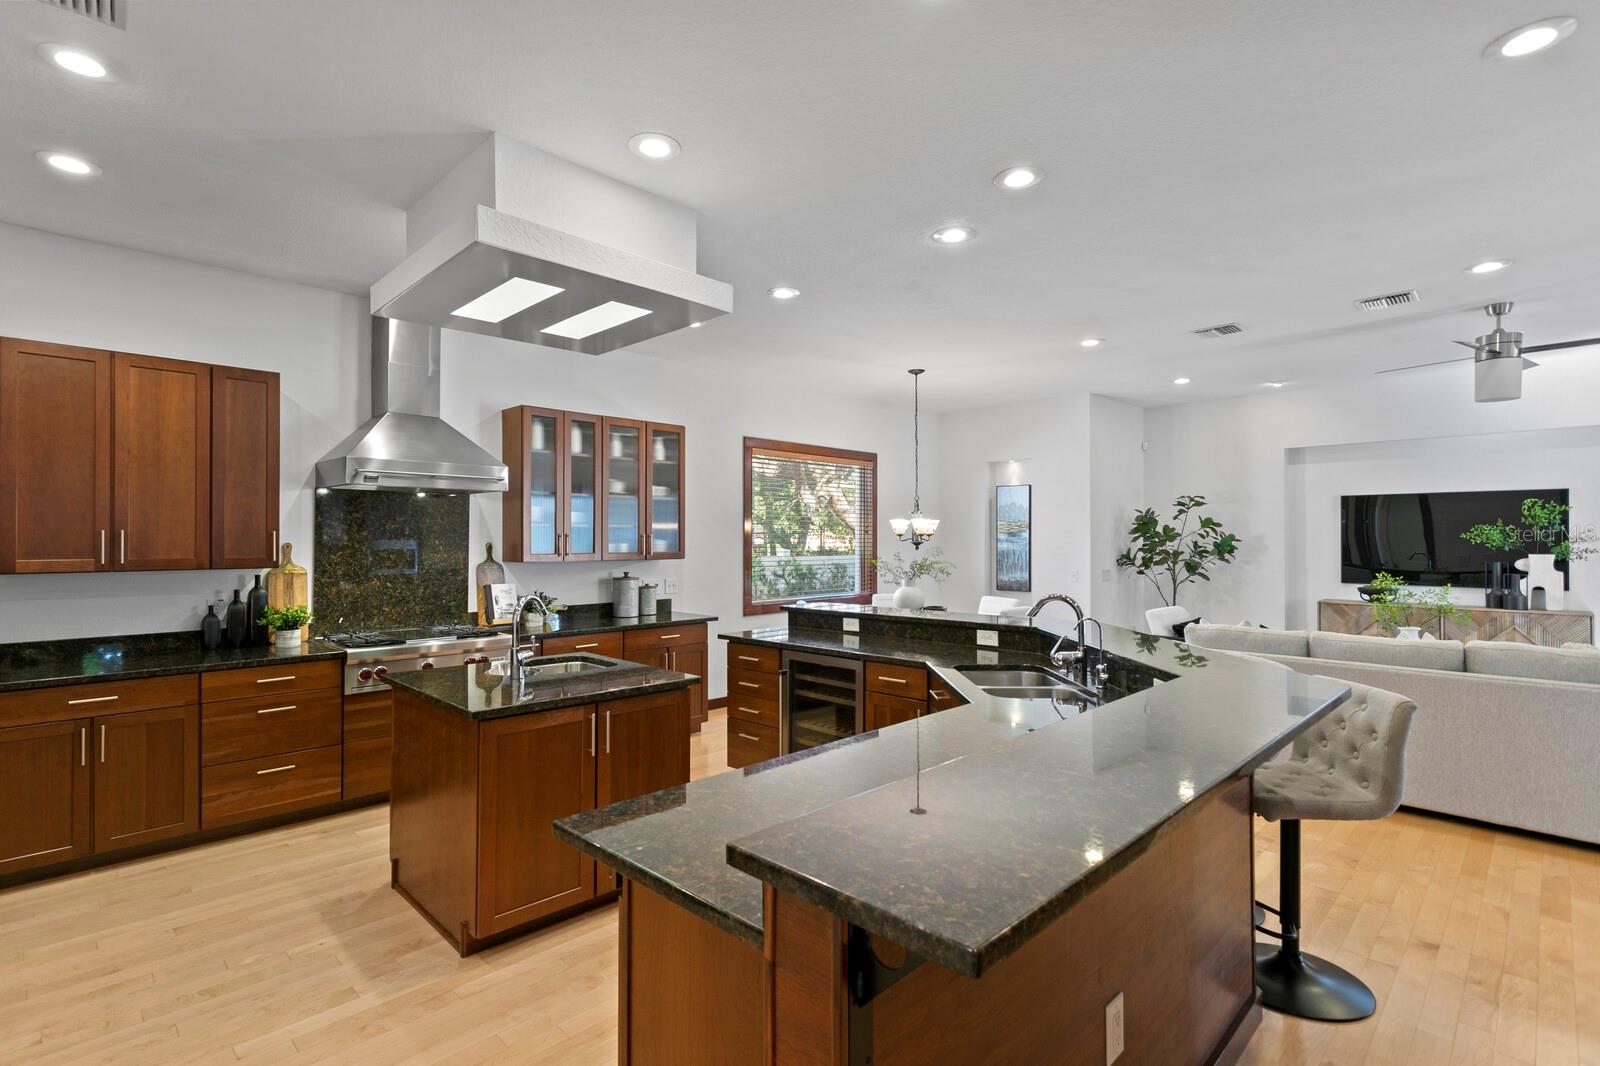 Wrap around granite counters provide ample space for preparing meals